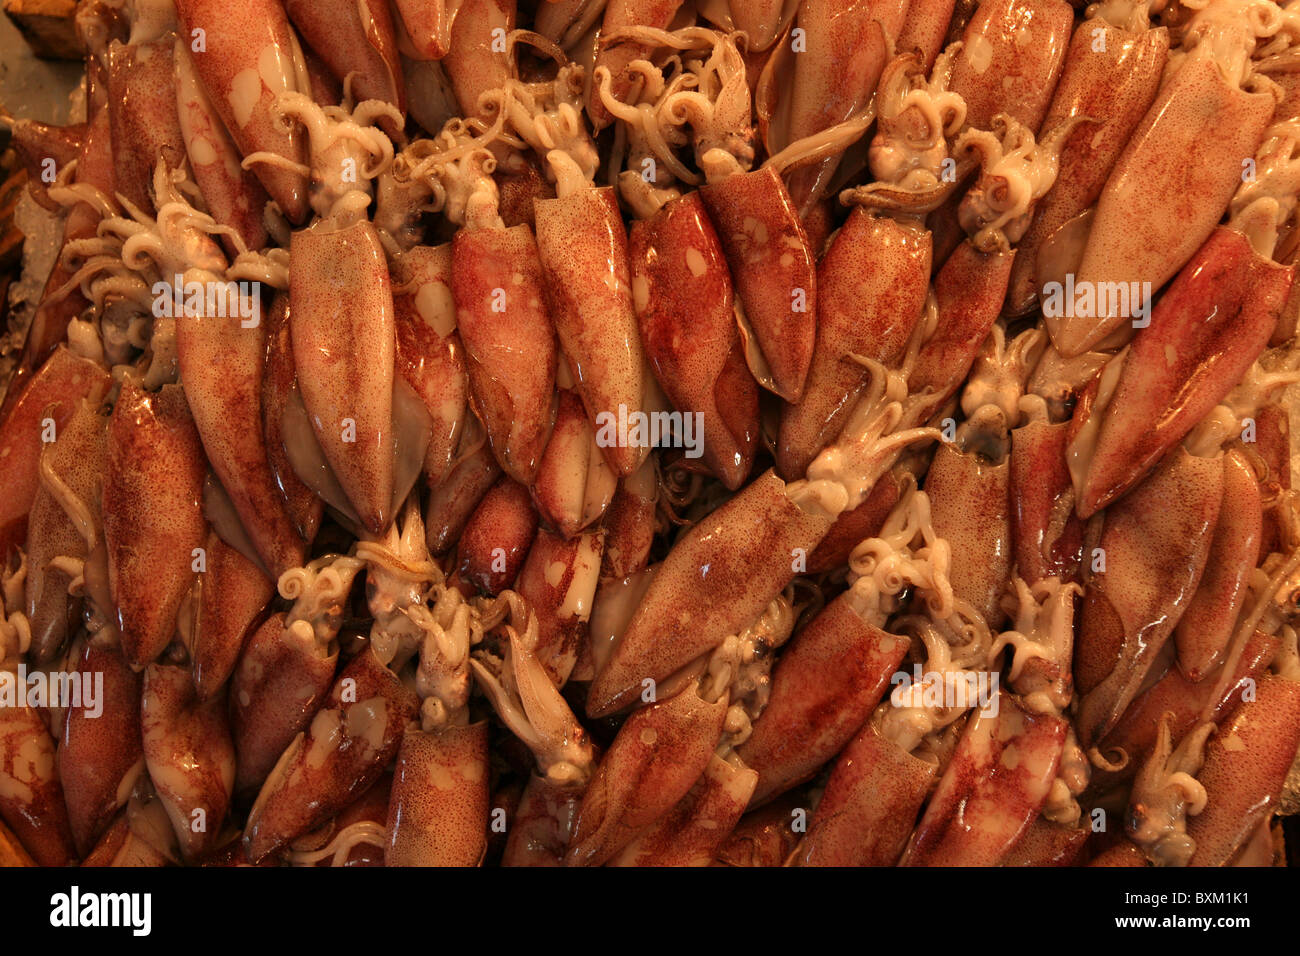 Central Seafood Market in Athens, Greece. Stock Photo